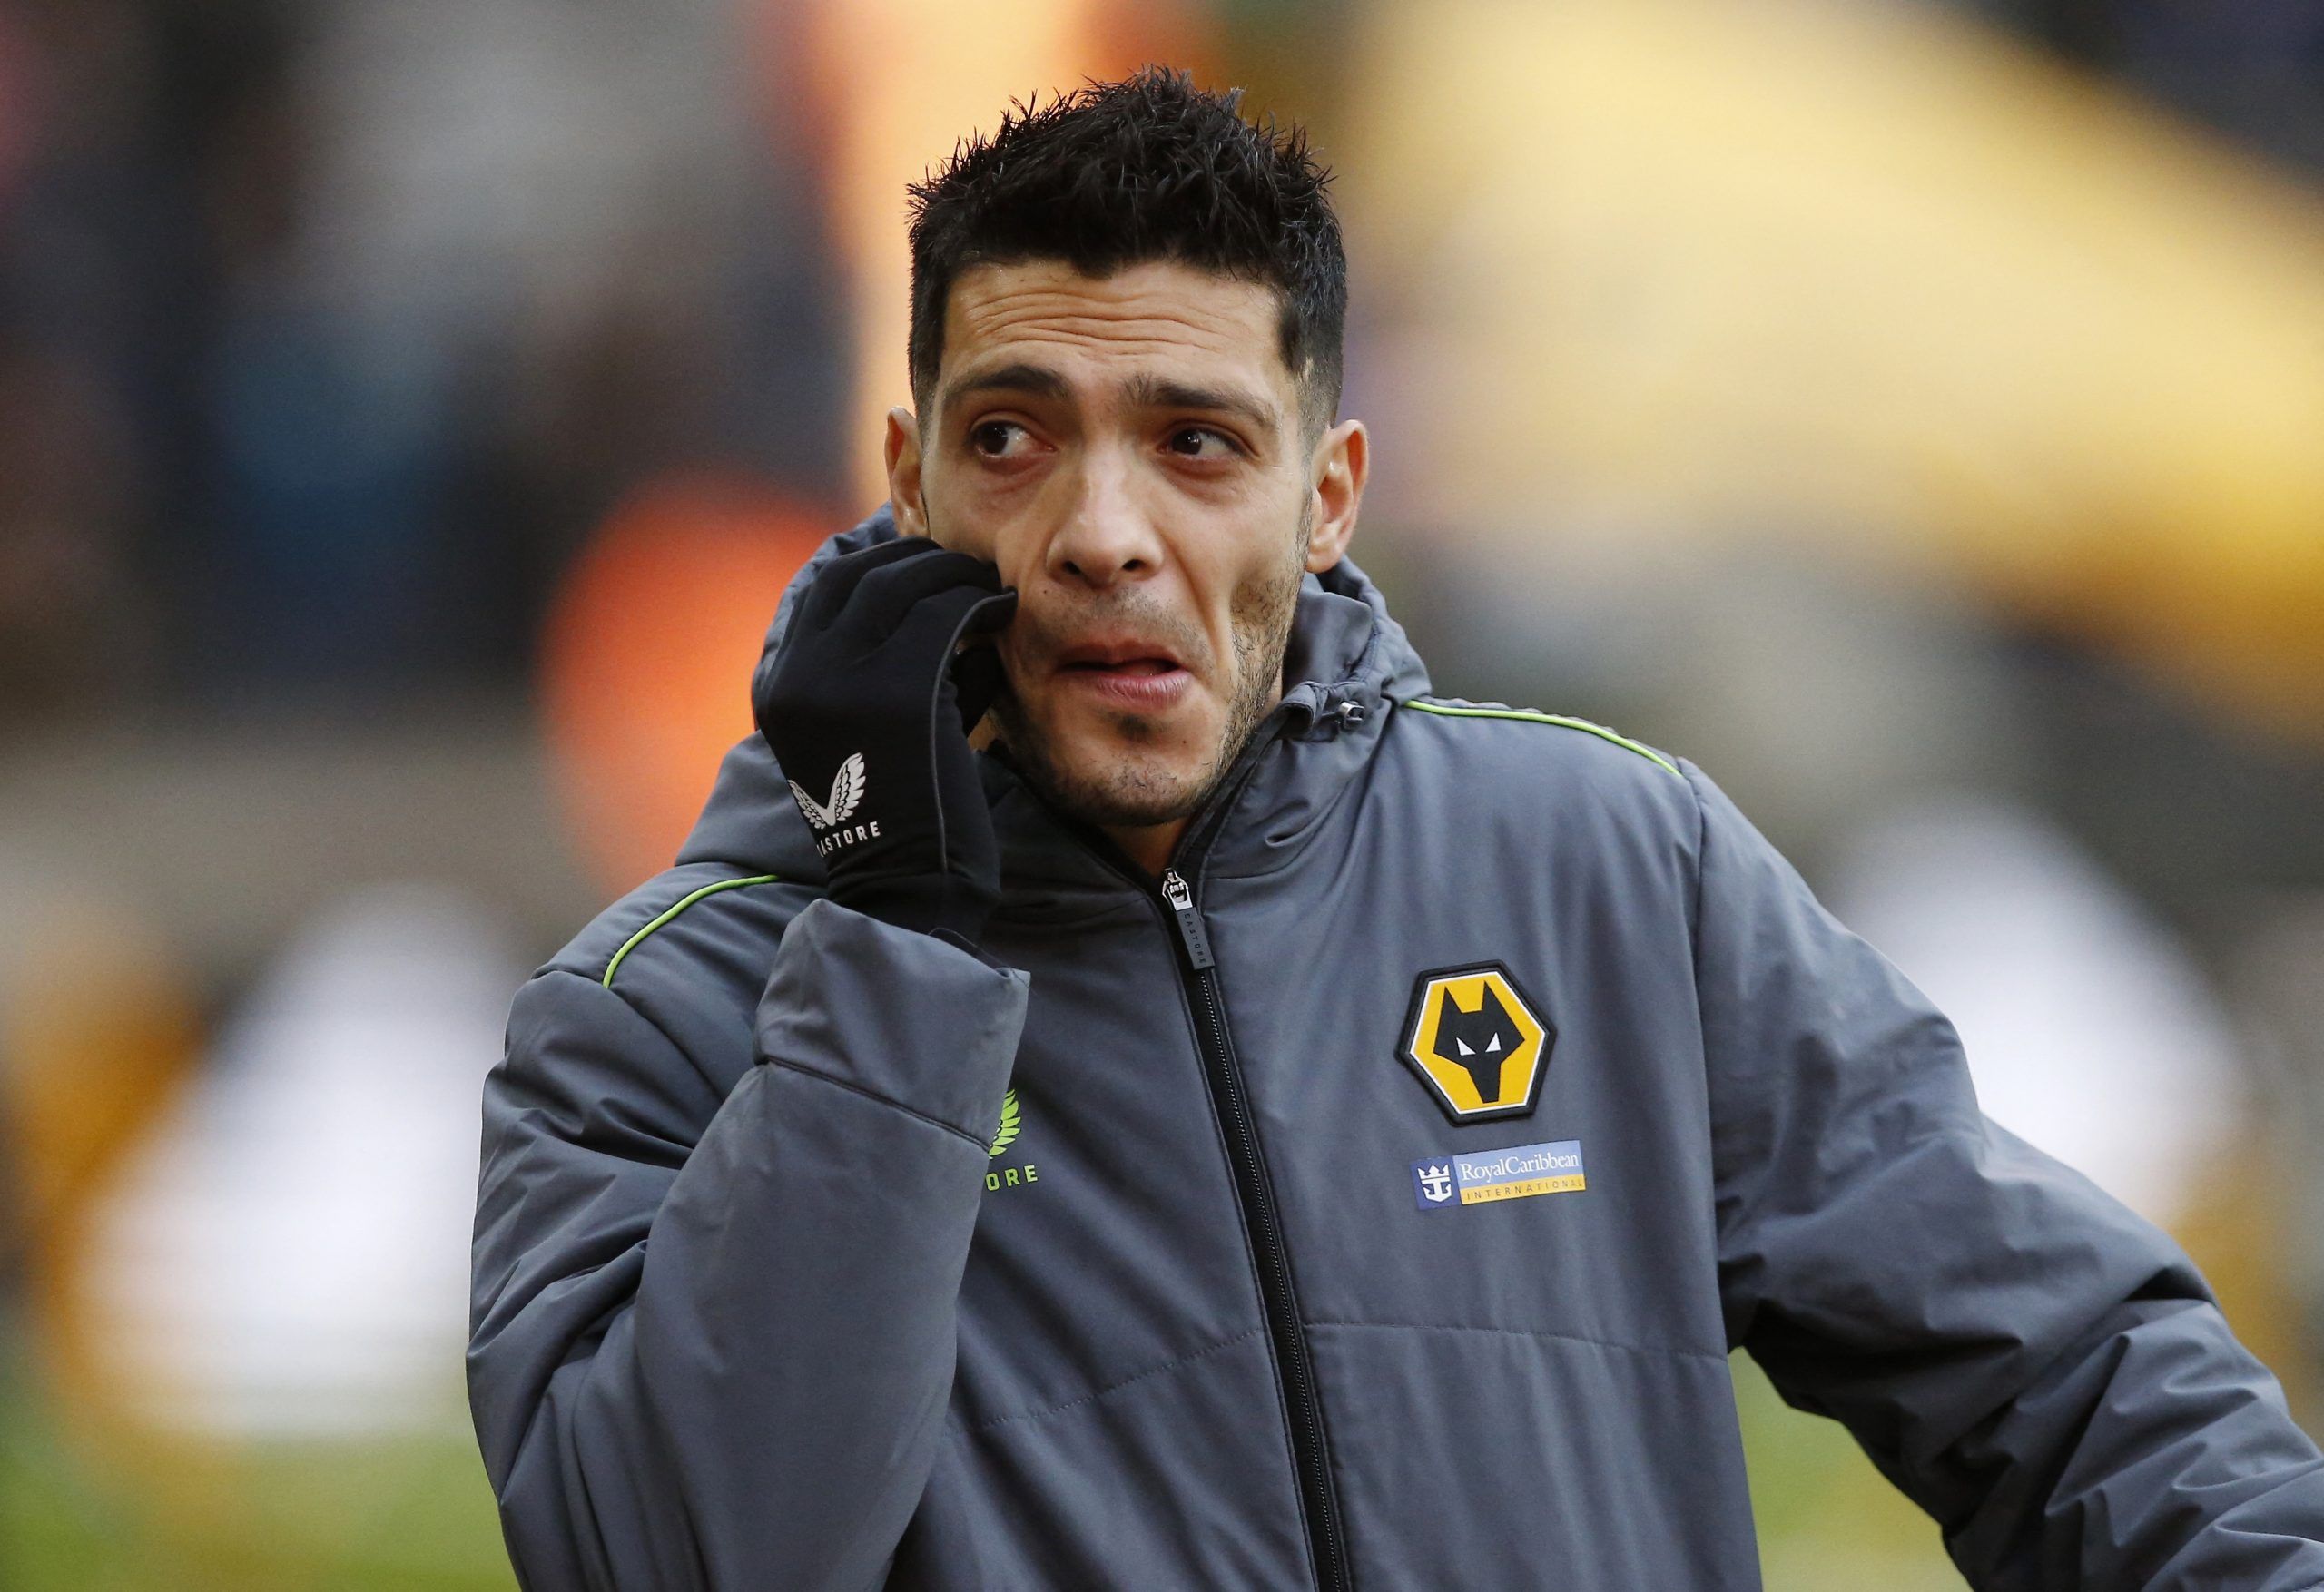 Soccer Football - Premier League - Wolverhampton Wanderers v AFC Bournemouth - Molineux Stadium, Wolverhampton, Britain - February 18, 2023 Wolverhampton Wanderers' Raul Jimenez before the match Action Images via Reuters/Craig Brough EDITORIAL USE ONLY. No use with unauthorized audio, video, data, fixture lists, club/league logos or 'live' services. Online in-match use limited to 75 images, no video emulation. No use in betting, games or single club /league/player publications.  Please contact y